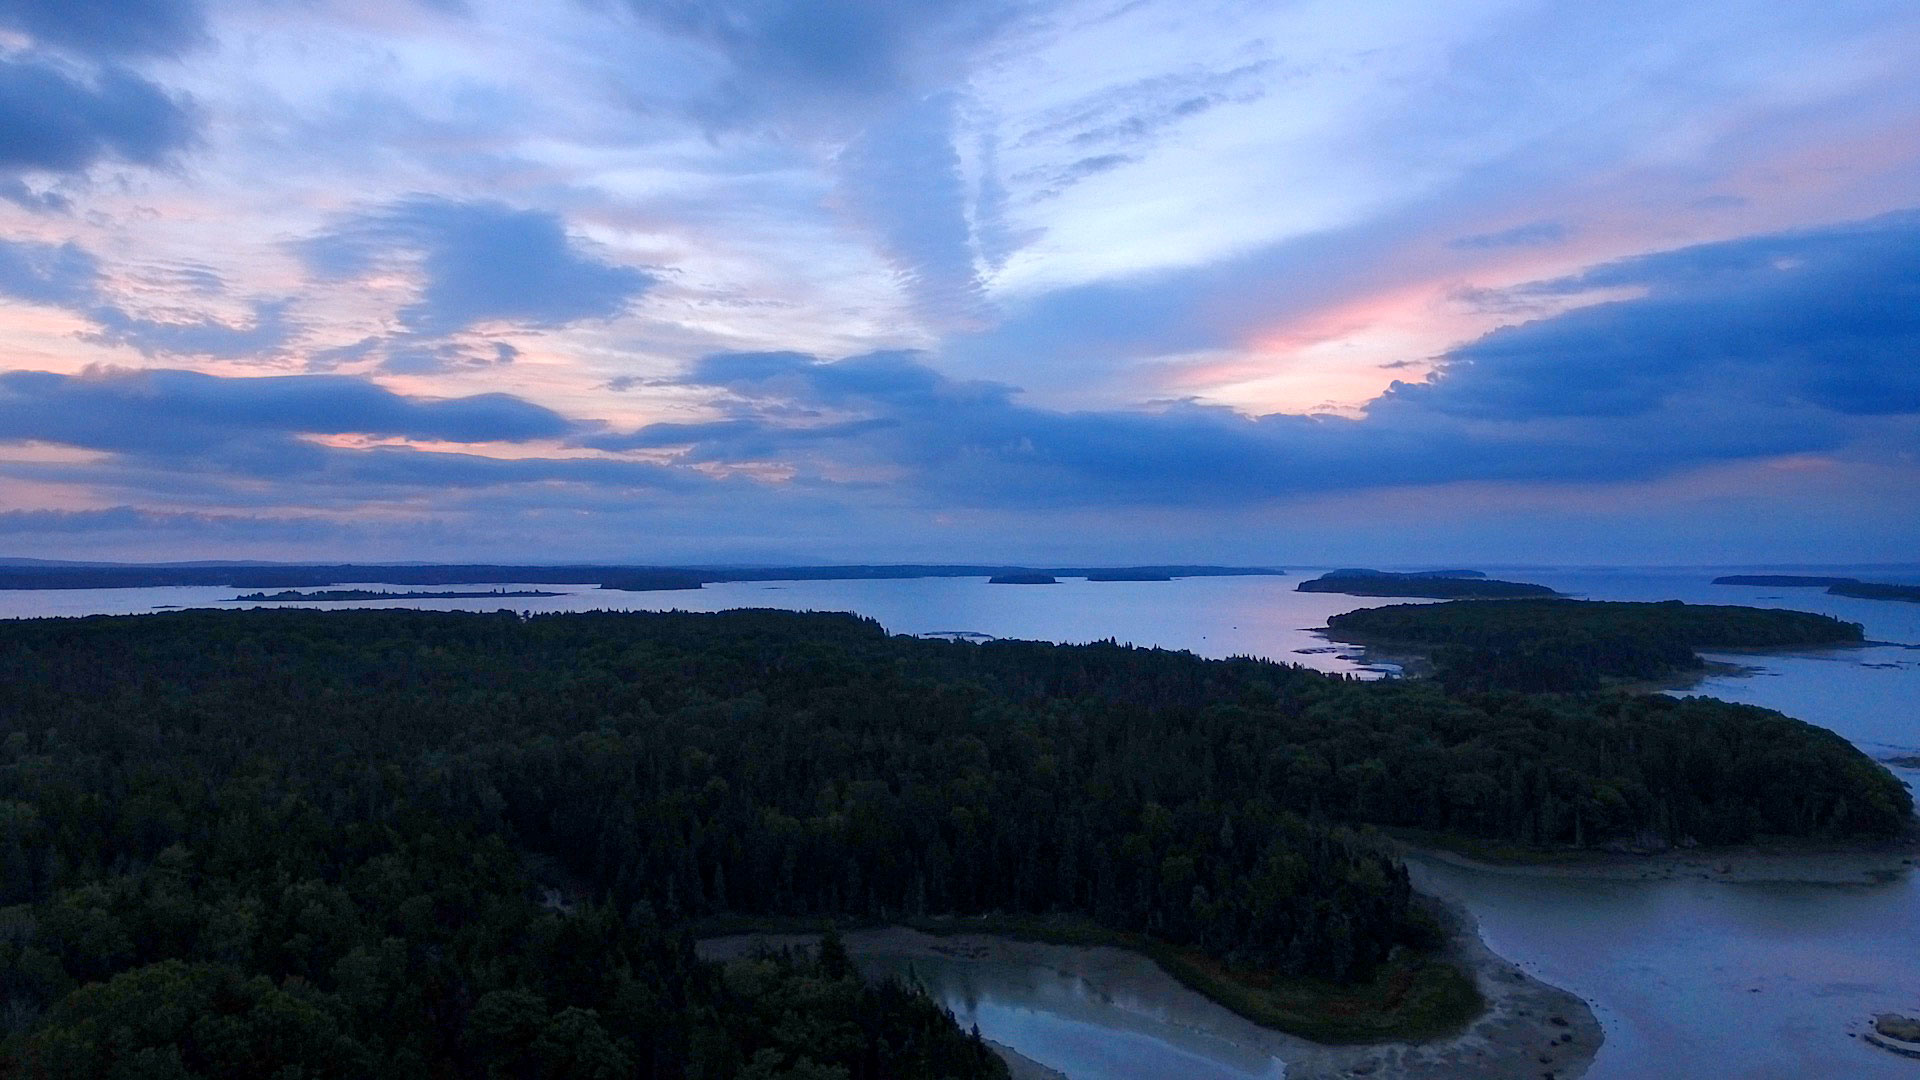 Sunrise over Deer Isle from the Phantom 4. Frame grab from a video clip. Deer Isle, Maine. August, 2016.